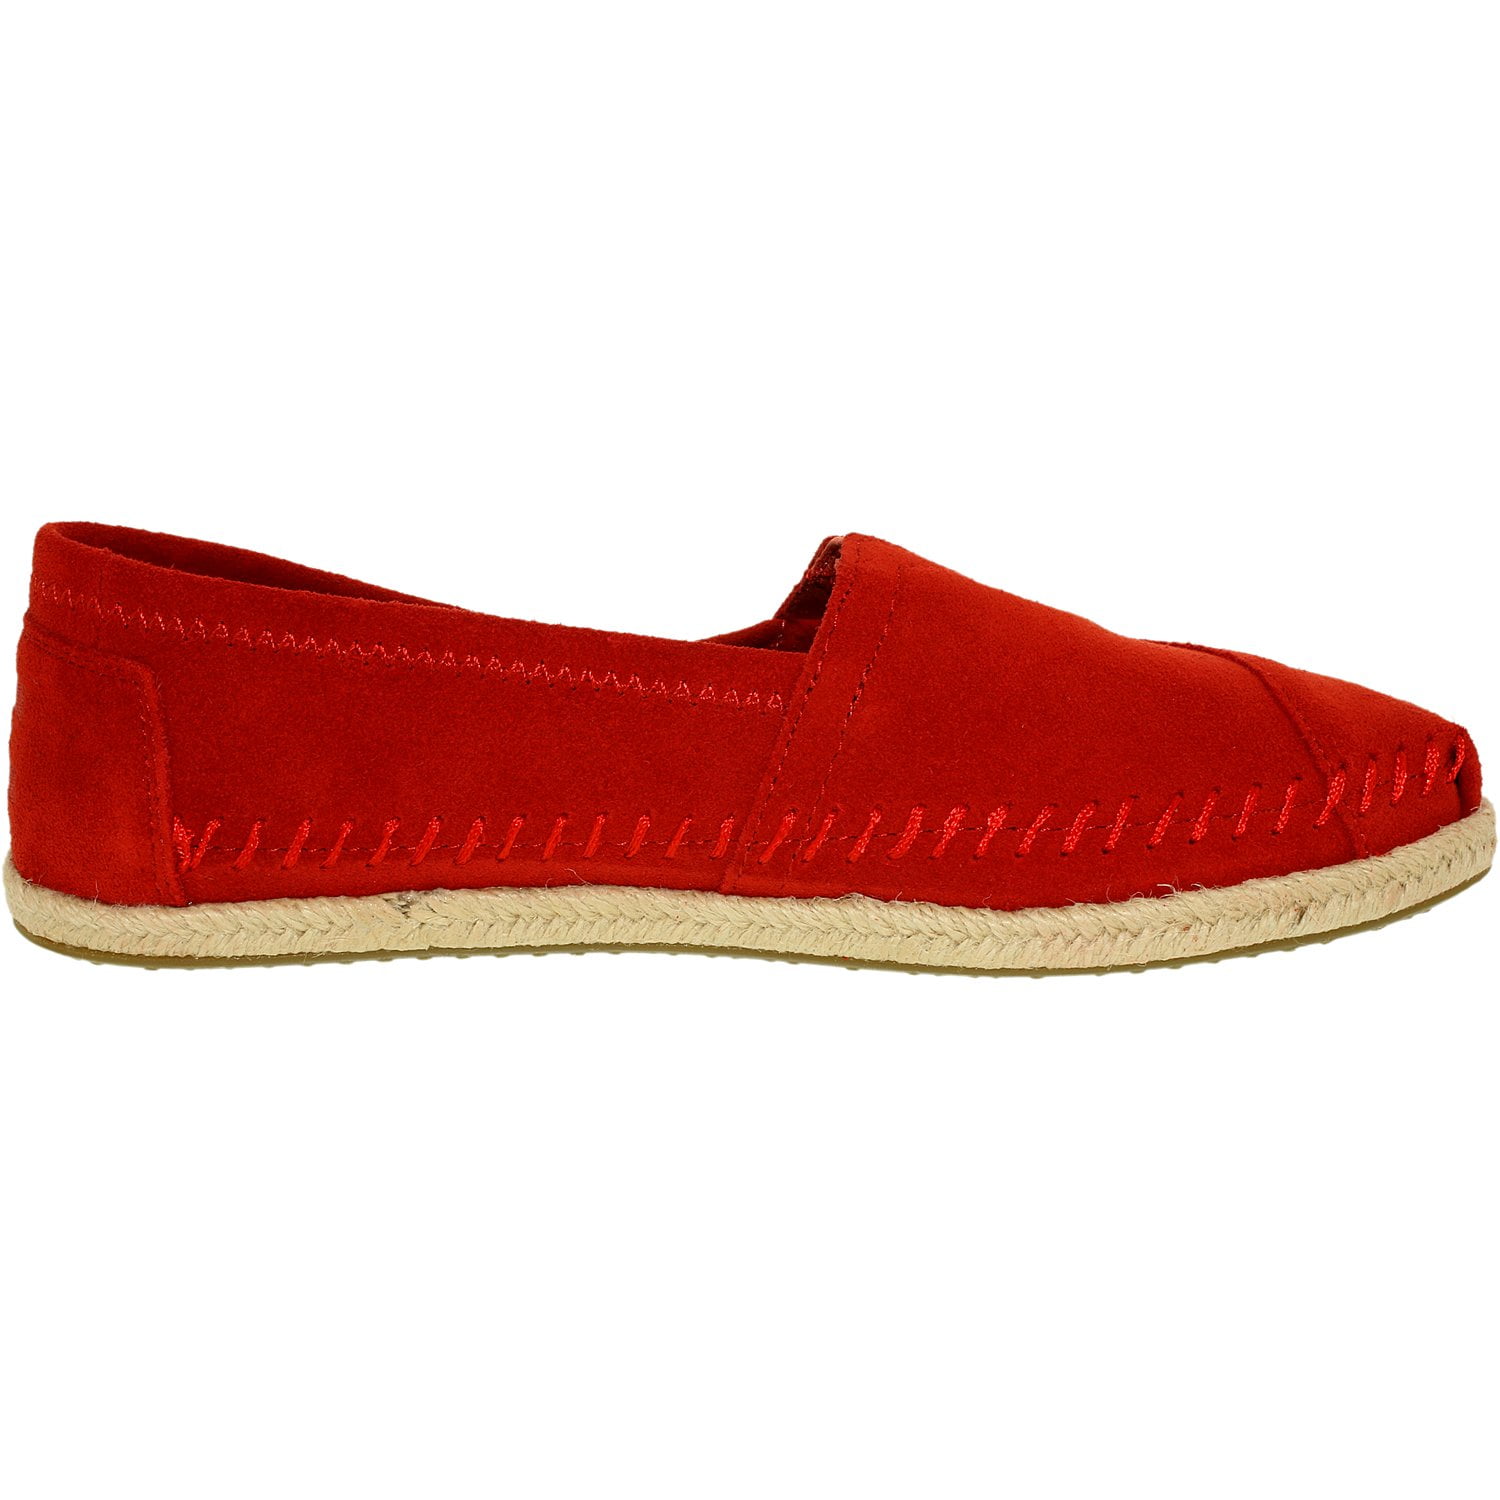 Toms Women's Alpargata Suede Rope Red Ankle-High Flat Shoe - 5.5M ...